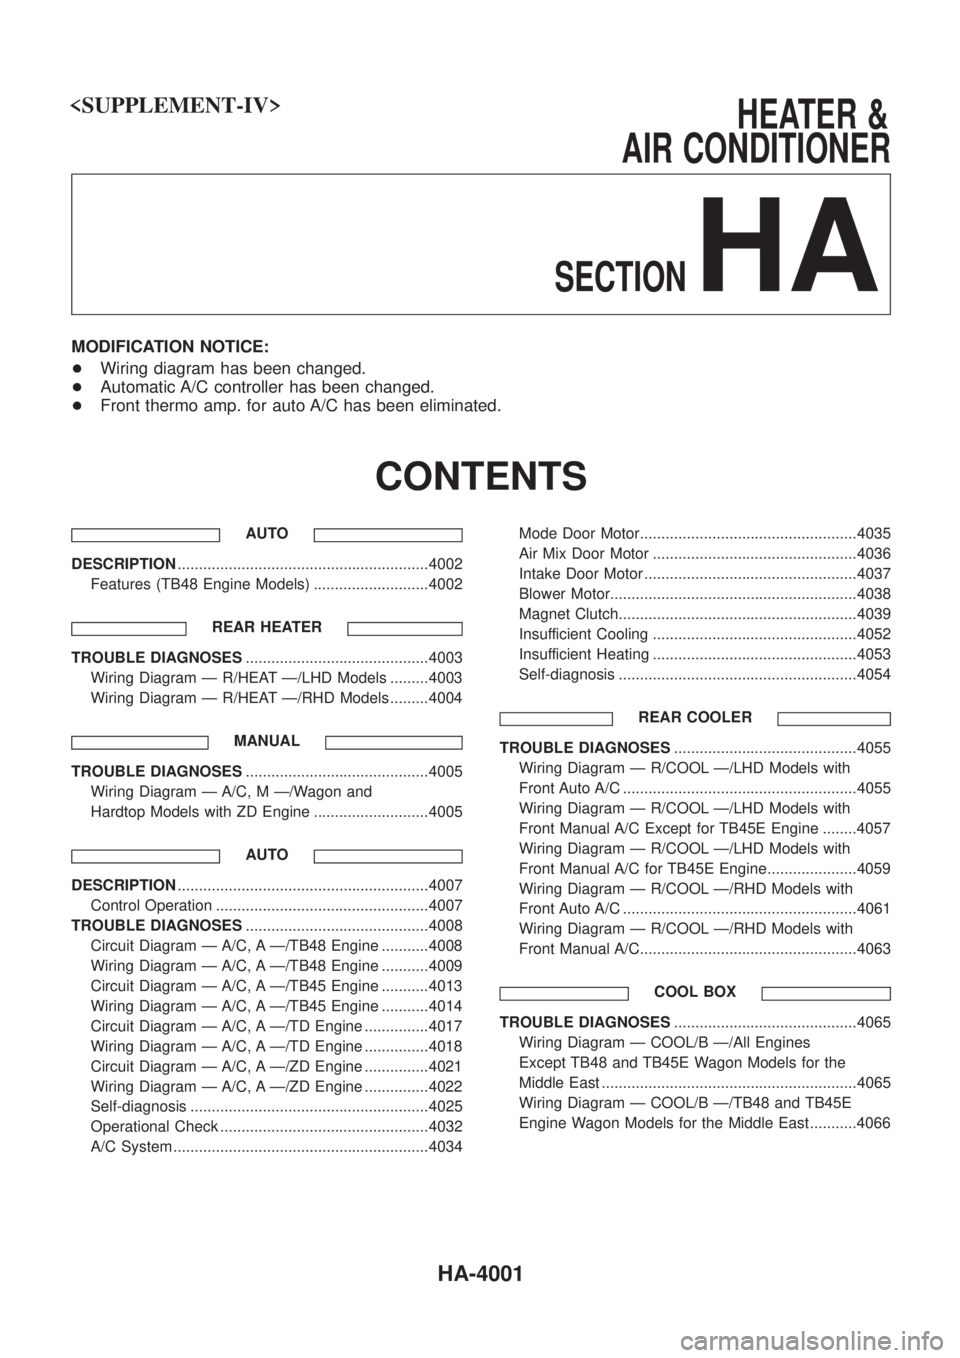 NISSAN PATROL 2004  Electronic Repair Manual <SUPPLEMENT-IV>                                                                        \
          HEATER&
AIR CONDITIONER
SECTION
HA
MODIFICATION NOTICE:
+ Wiring diagram has been changed.
+ Automati